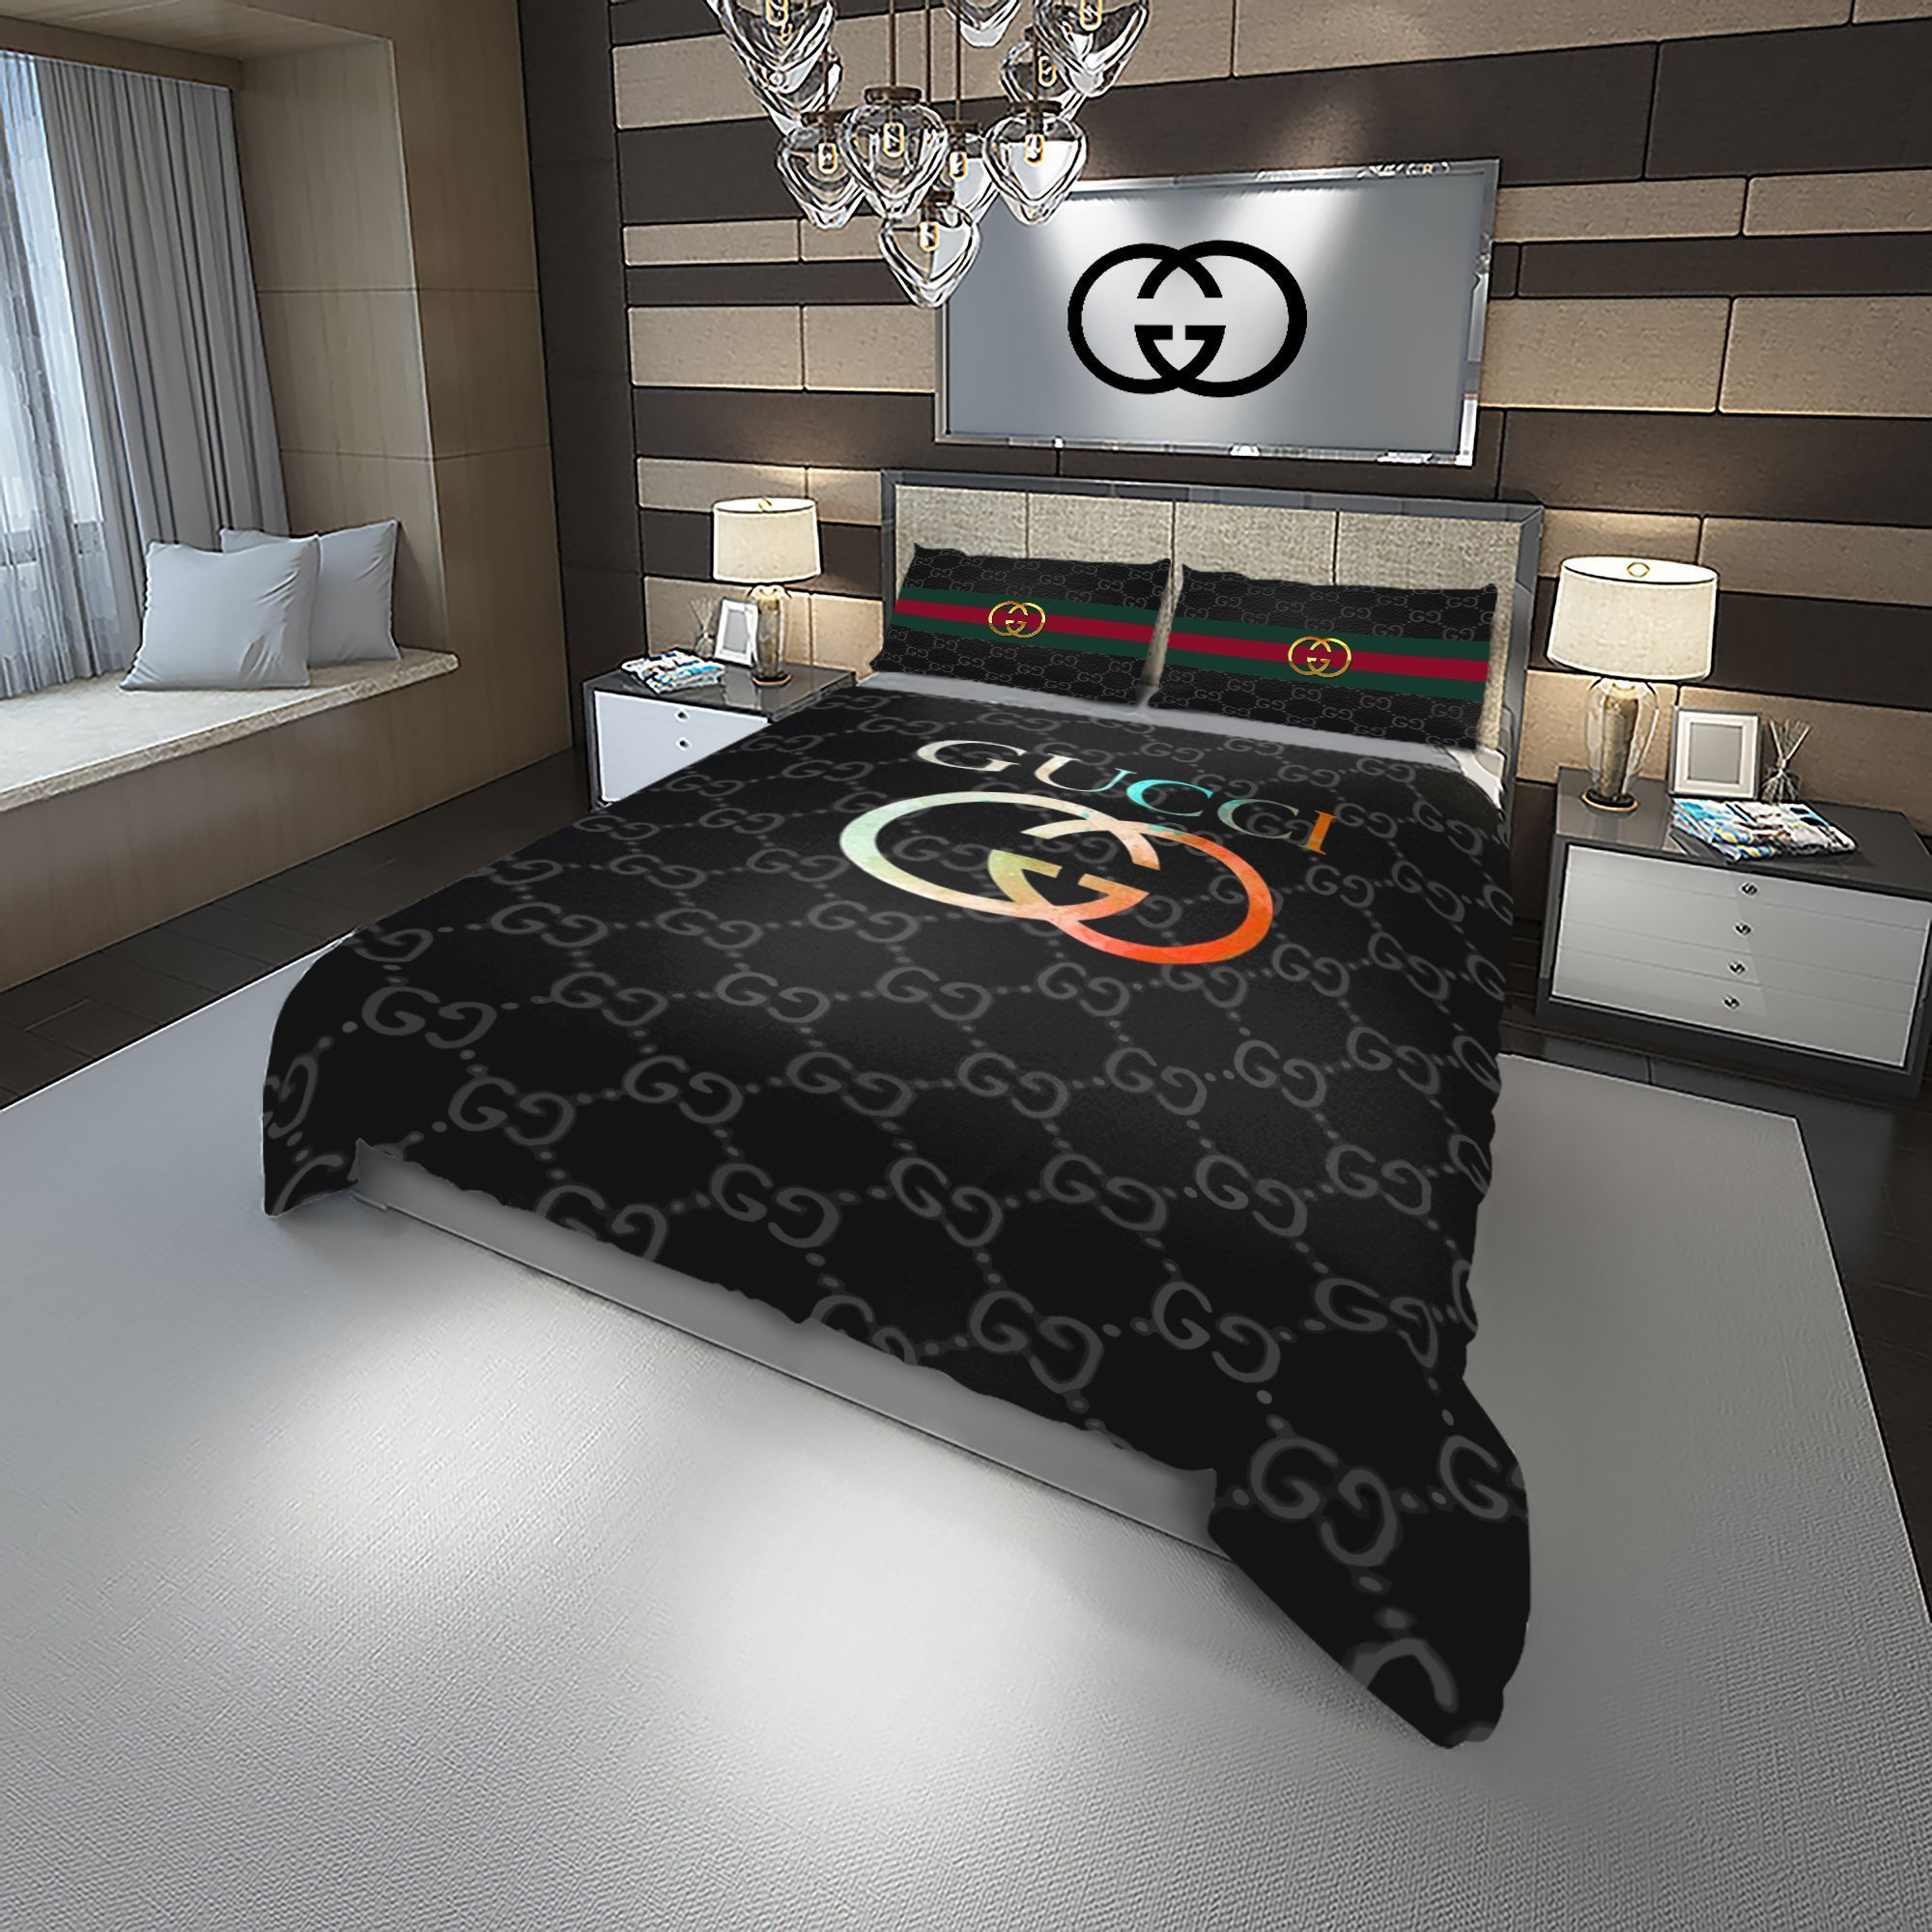 Let me show you about some luxury brand bedding set 2022 115